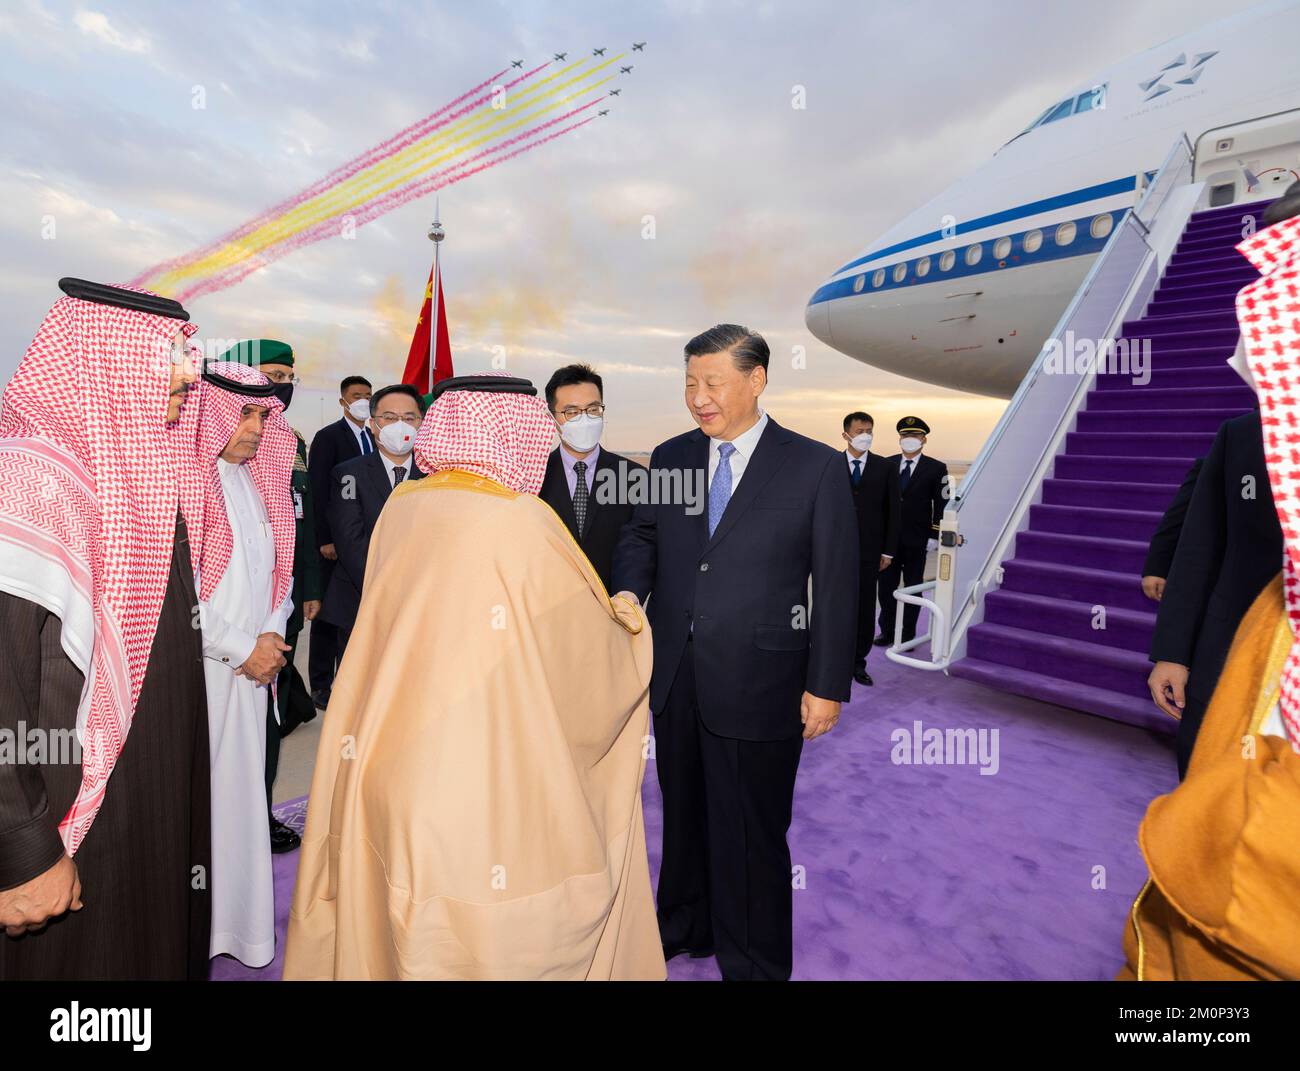 (221207) -- RIYADH, Dec. 7, 2022 (Xinhua) -- Chinese President Xi Jinping is warmly greeted upon his arrival by Governor of Riyadh Province Prince Faisal bin Bandar Al Saud, Foreign Minister Prince Faisal bin Farhan Al Saud, Minister Yasir Al-Rumayyan who works on China affairs and other key members of the royal family and senior officials of the government at the King Khalid International Airport in Riyadh, Saudi Arabia, Dec. 7, 2022. Chinese President Xi Jinping arrived here Wednesday afternoon to attend the first China-Arab States Summit and the China-Gulf Cooperation Council (GCC) Summit, Stock Photo